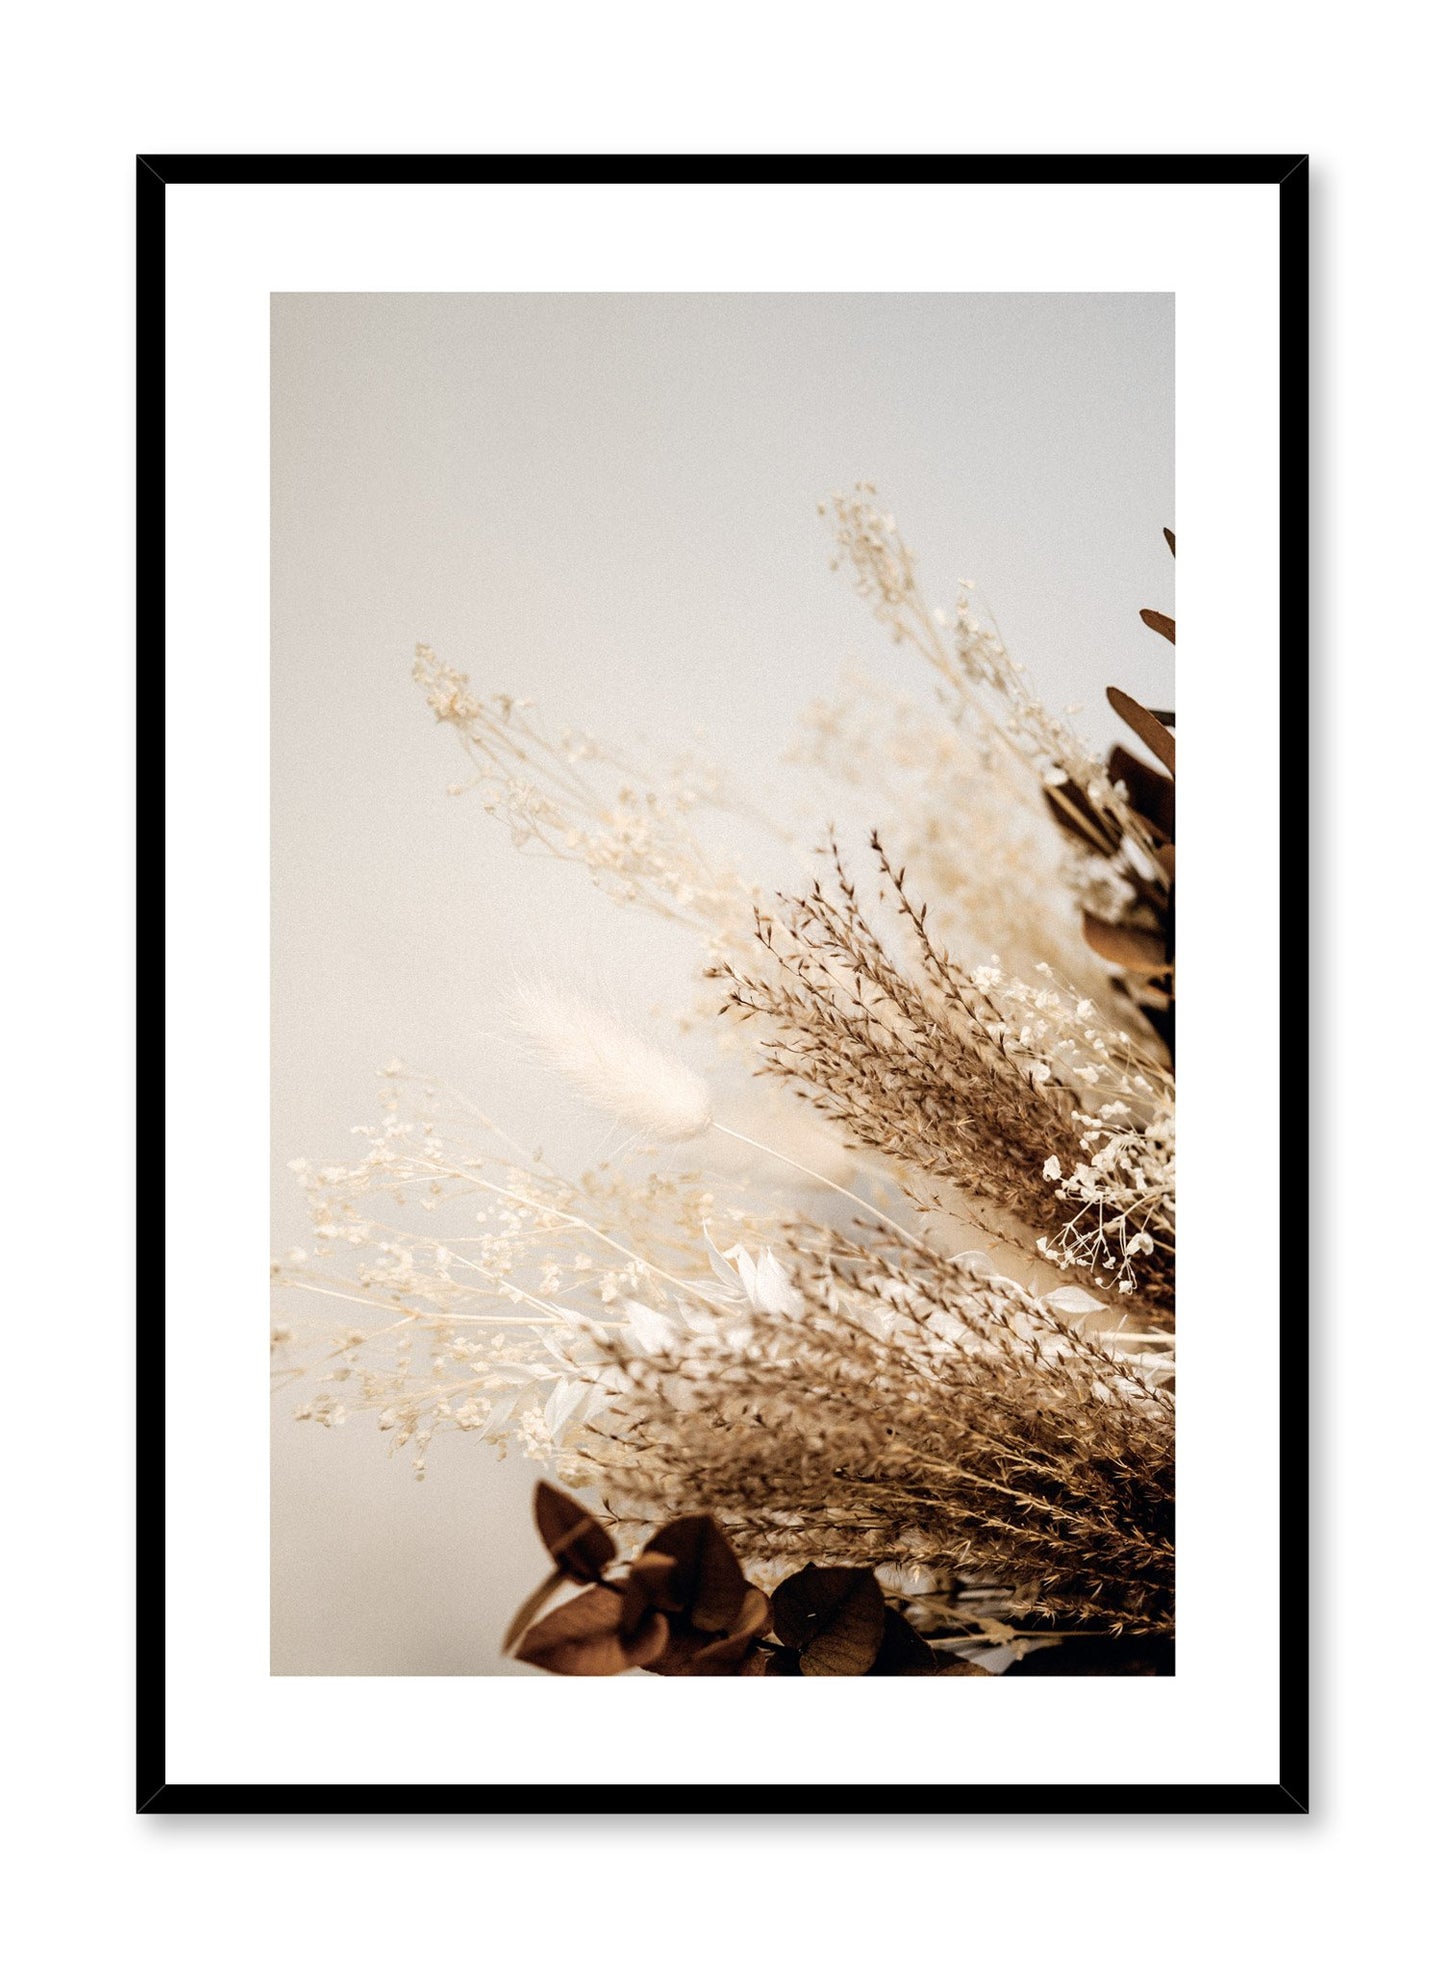 "Autumnal Bouquet" is a botanical photography poster by Opposite Wall of warm toned dried ornamental grasses bouquet including brown and beige leaves and white flowers.